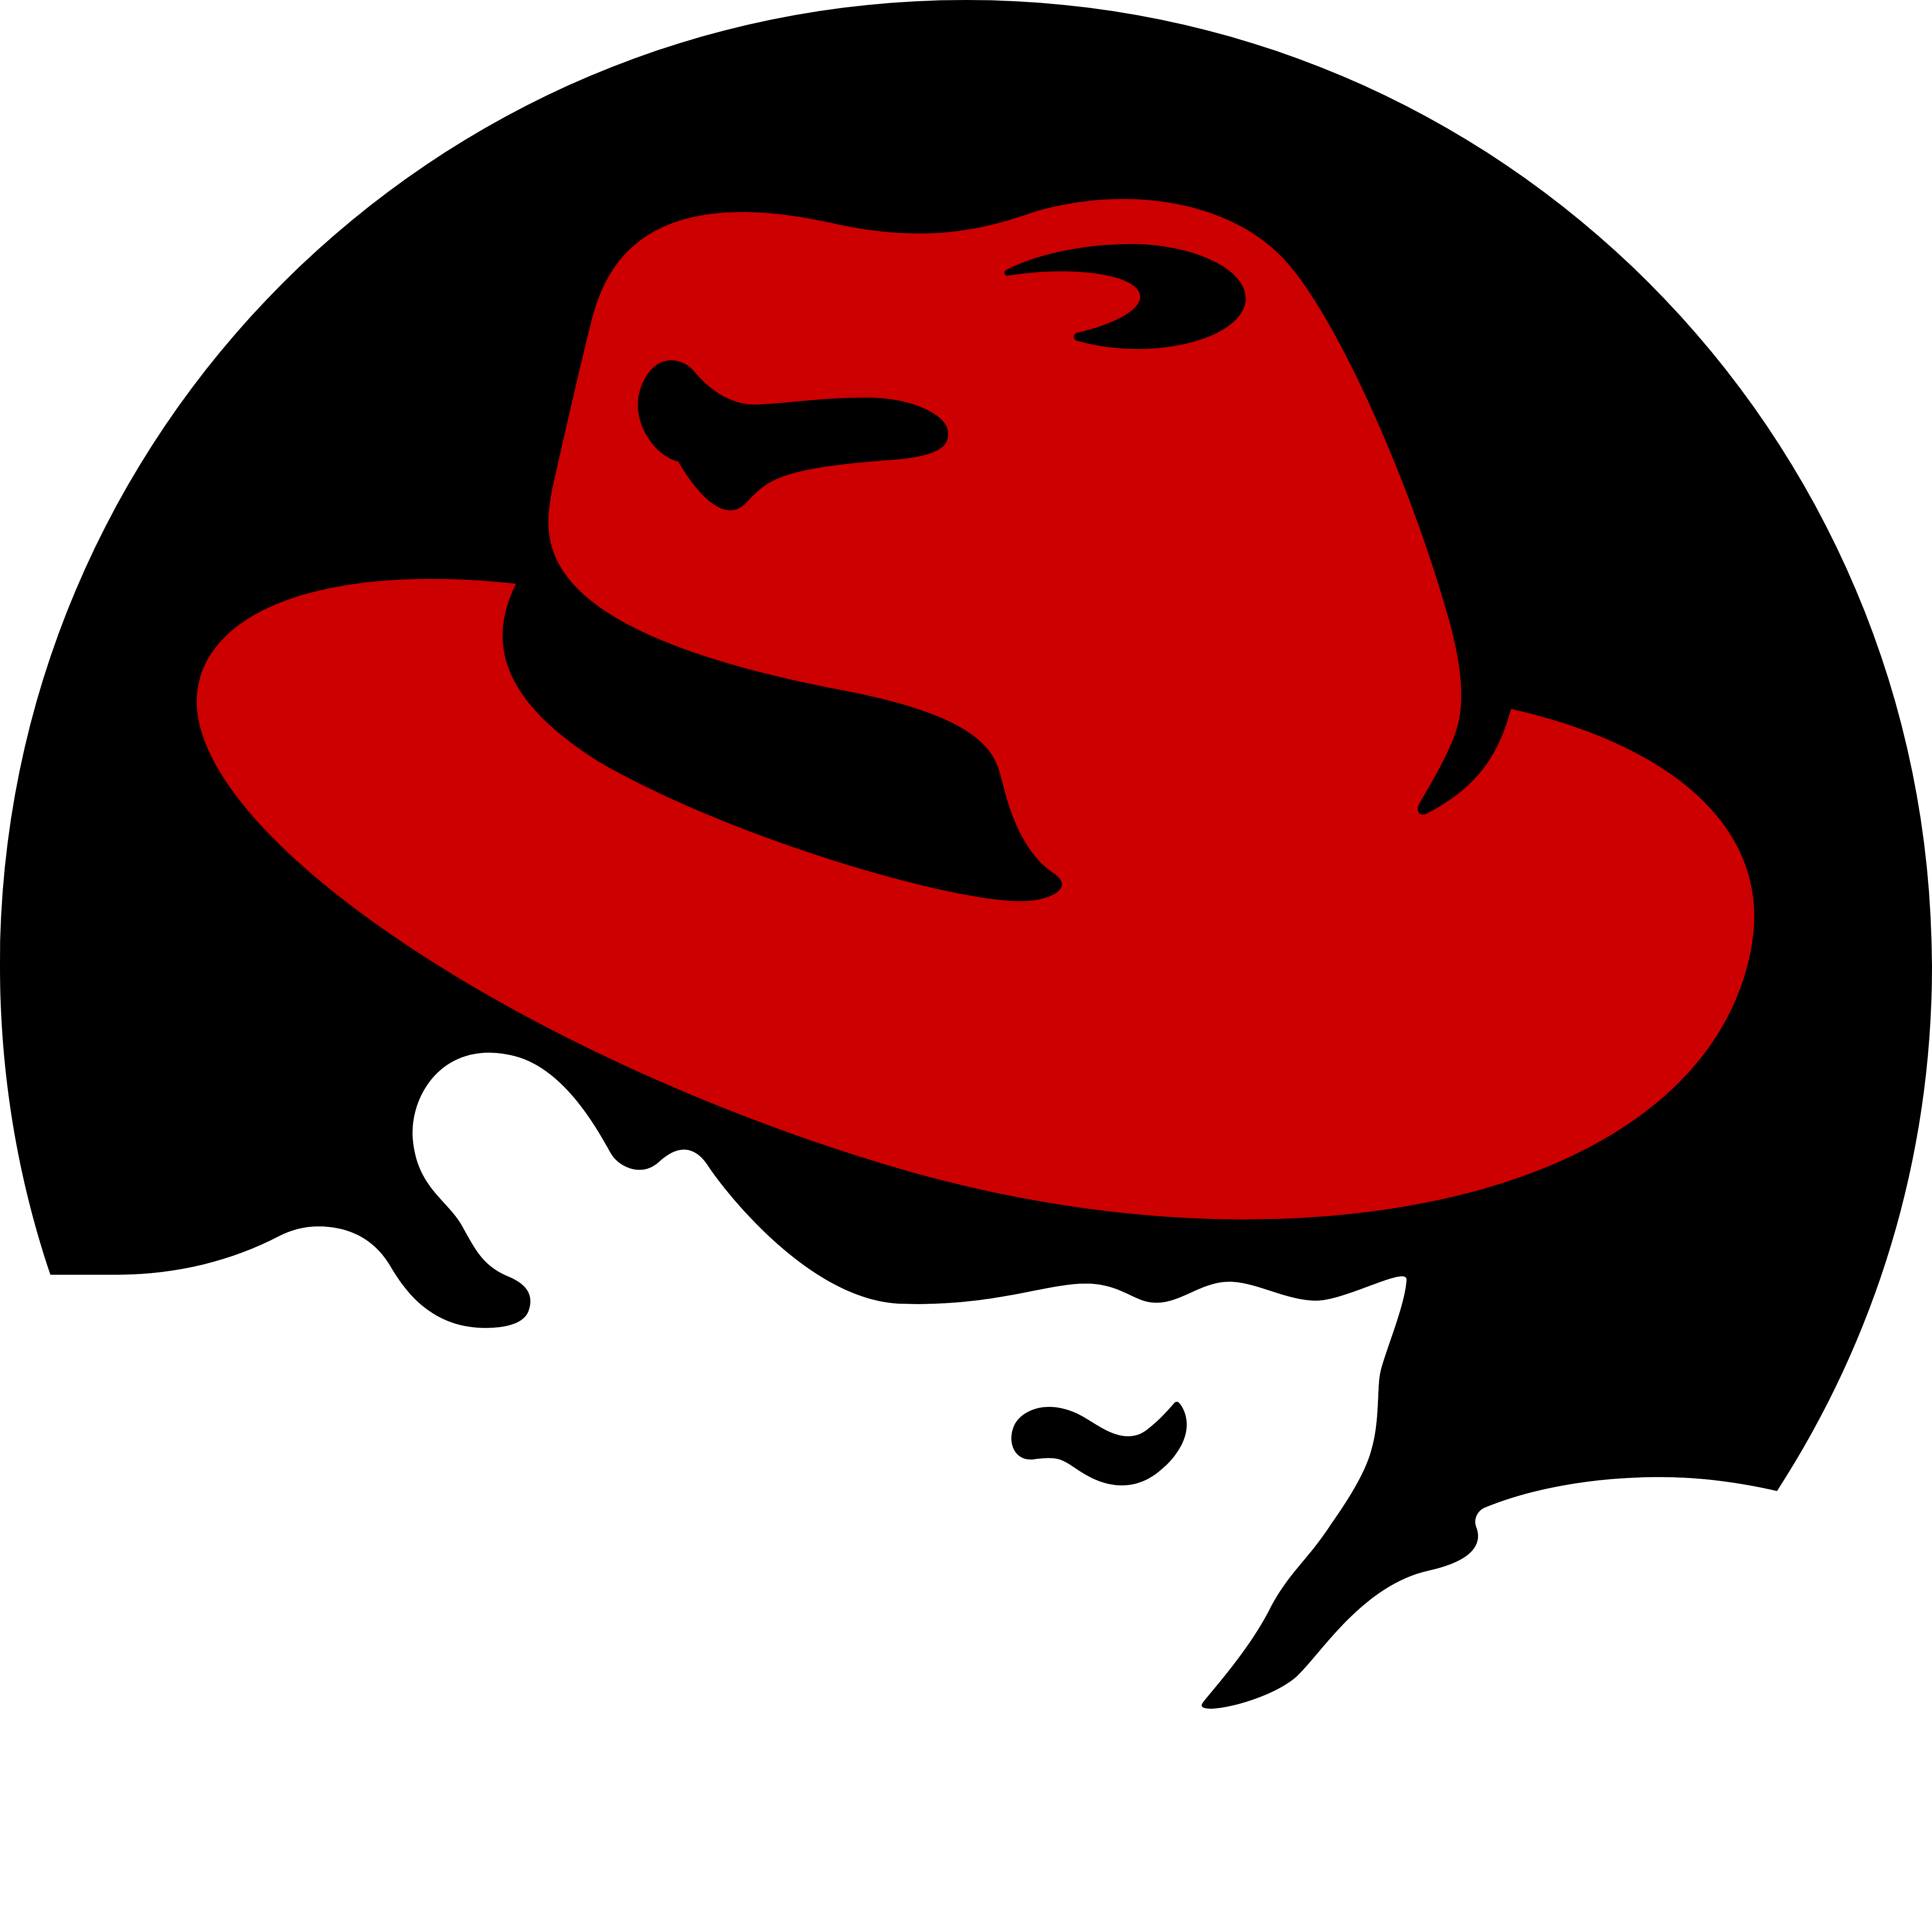 Red hat лого. Ред хат линукс. Red hat Linux logo. Дистрибутивы Linux Red hat. Red hat 8